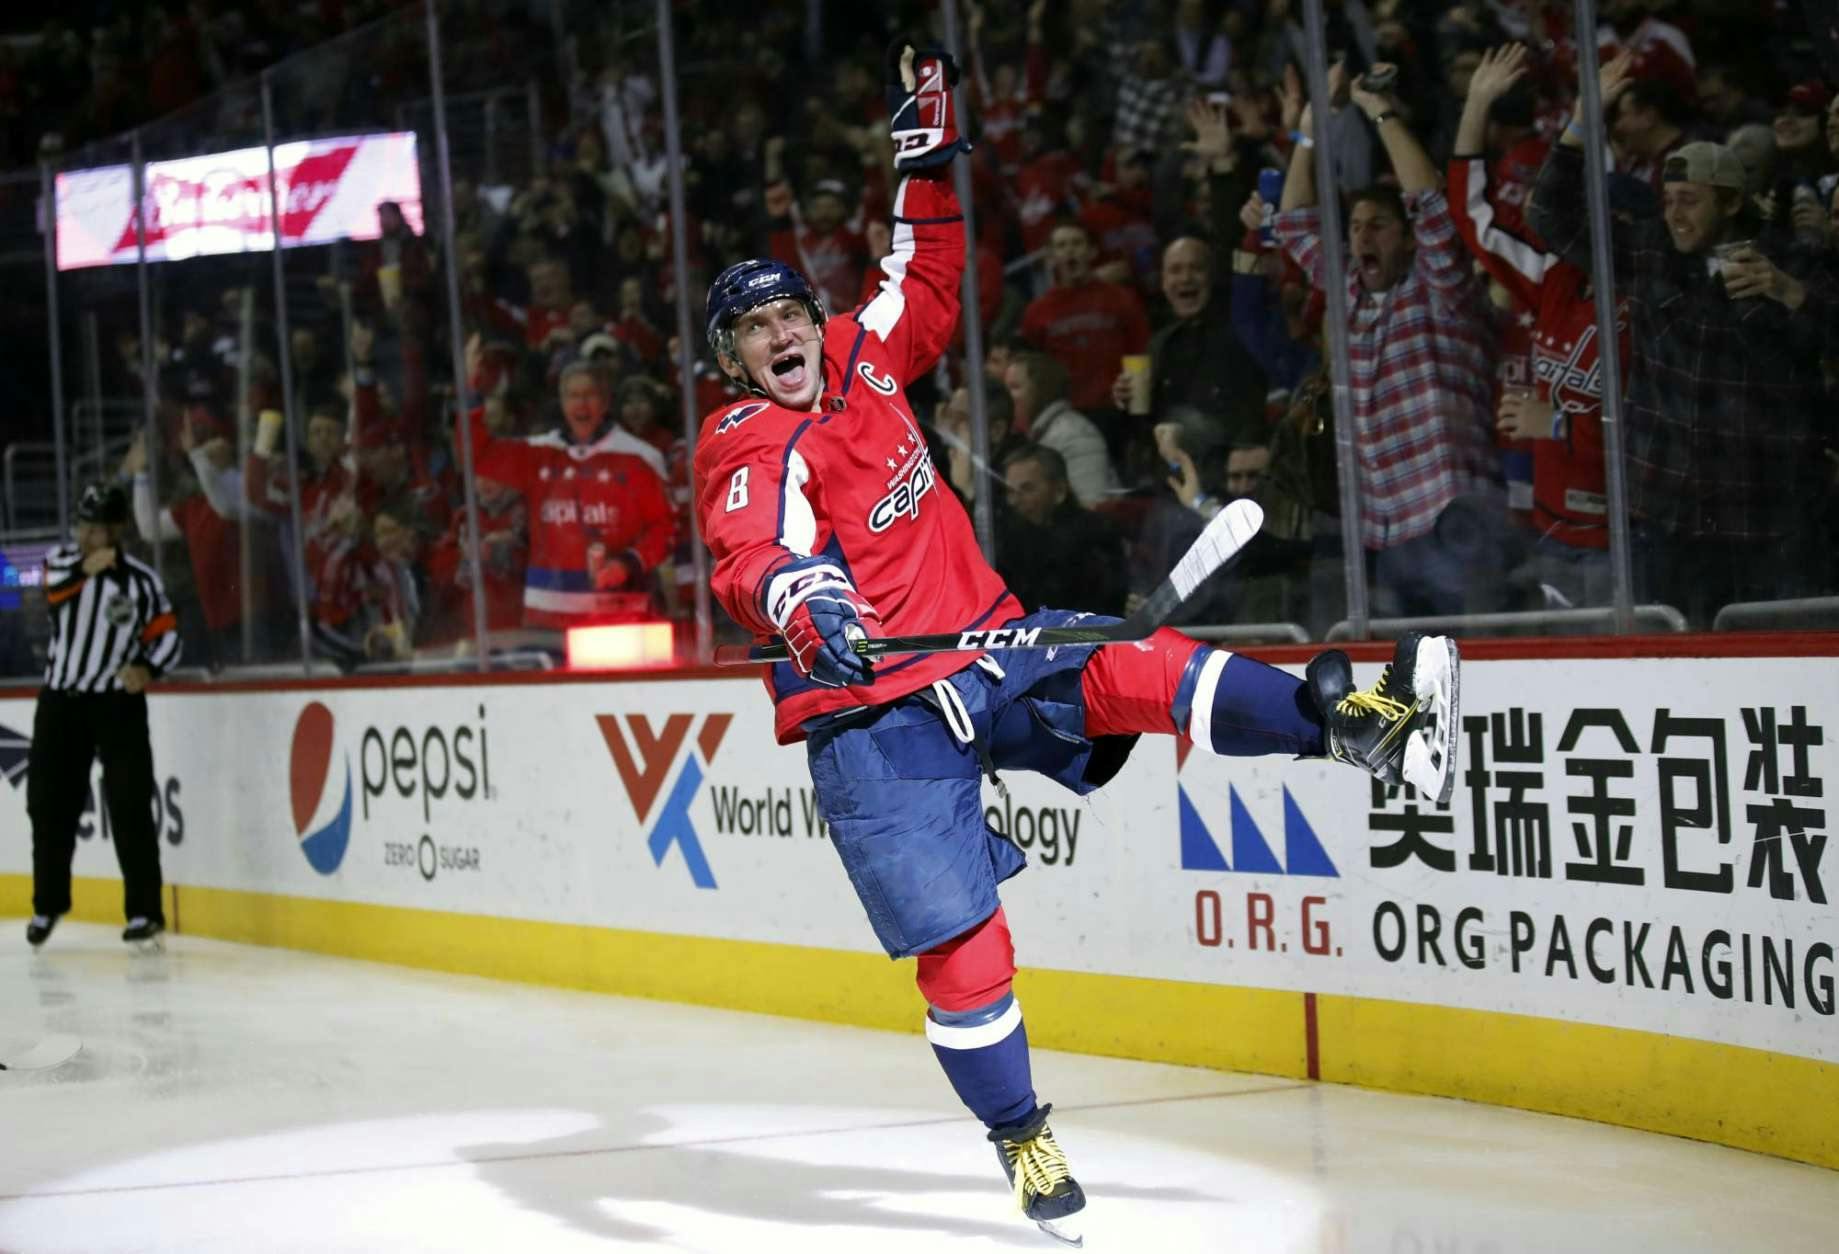 Gretzky: 'Not even a question' Ovechkin will become NHL's all-time